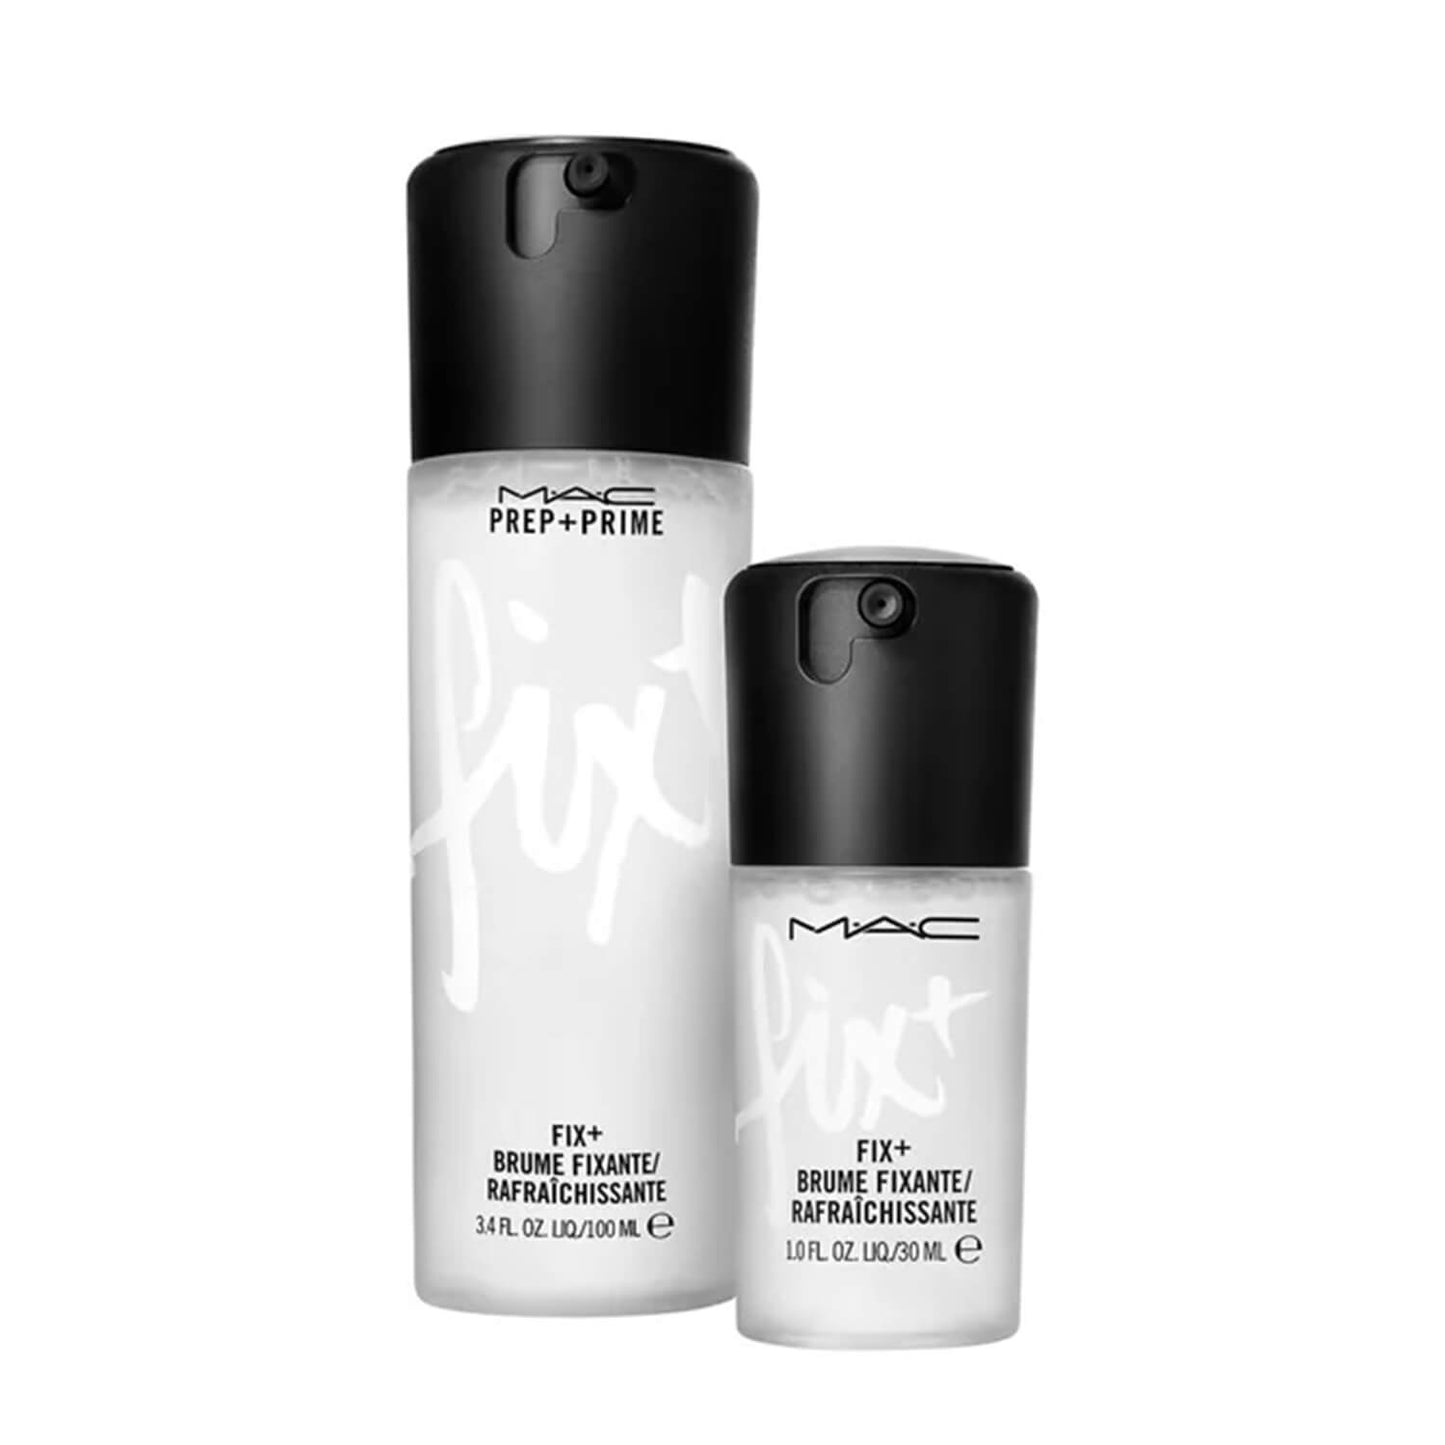 shop mac fixit prep prime setting spray duo available at Heygirl.pk for delivery in Pakistan